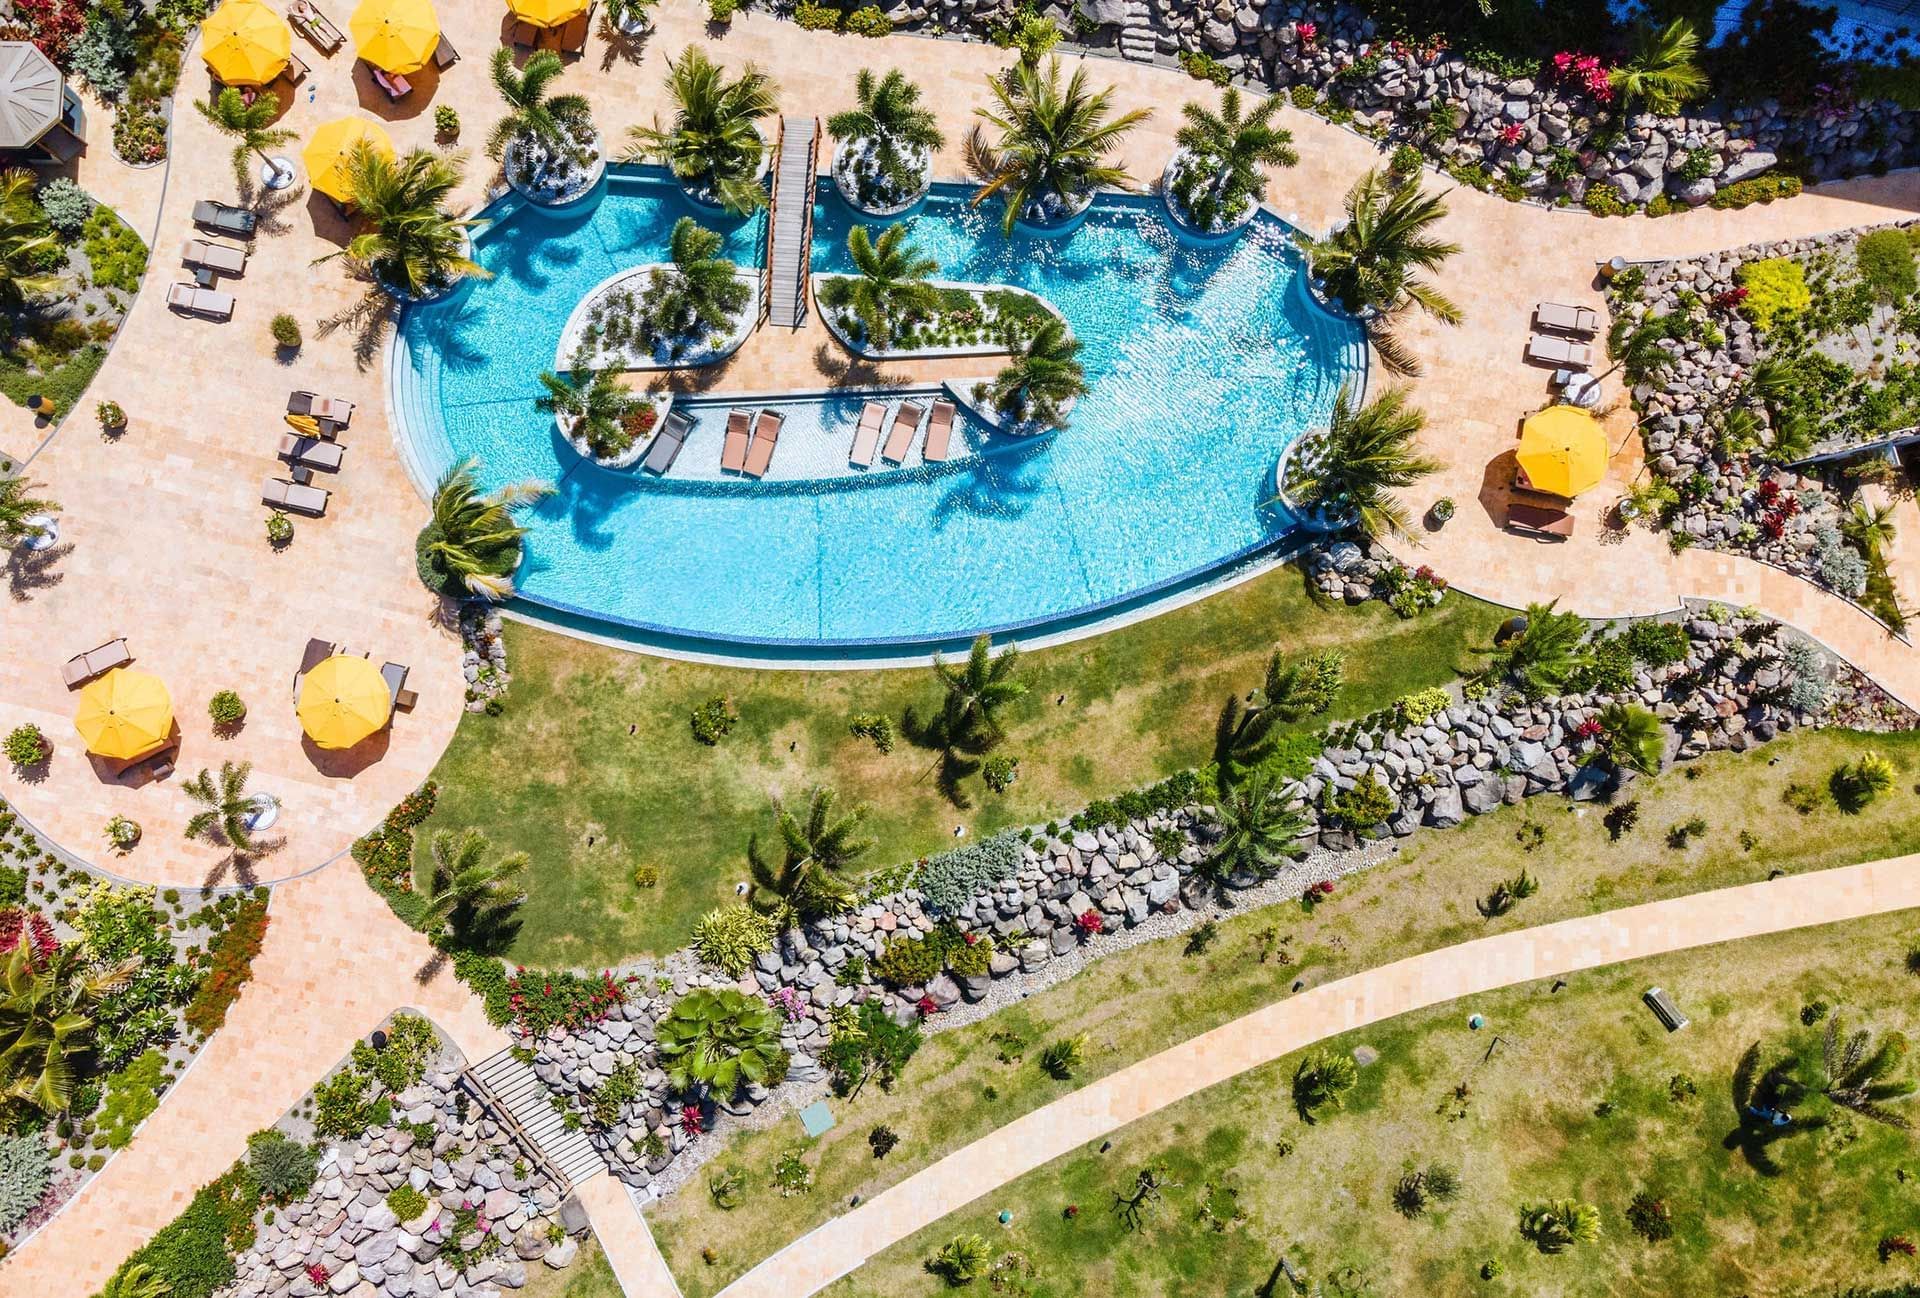 Aerial view of Sunbeds by the outdoor pool, Golden Rock Resort